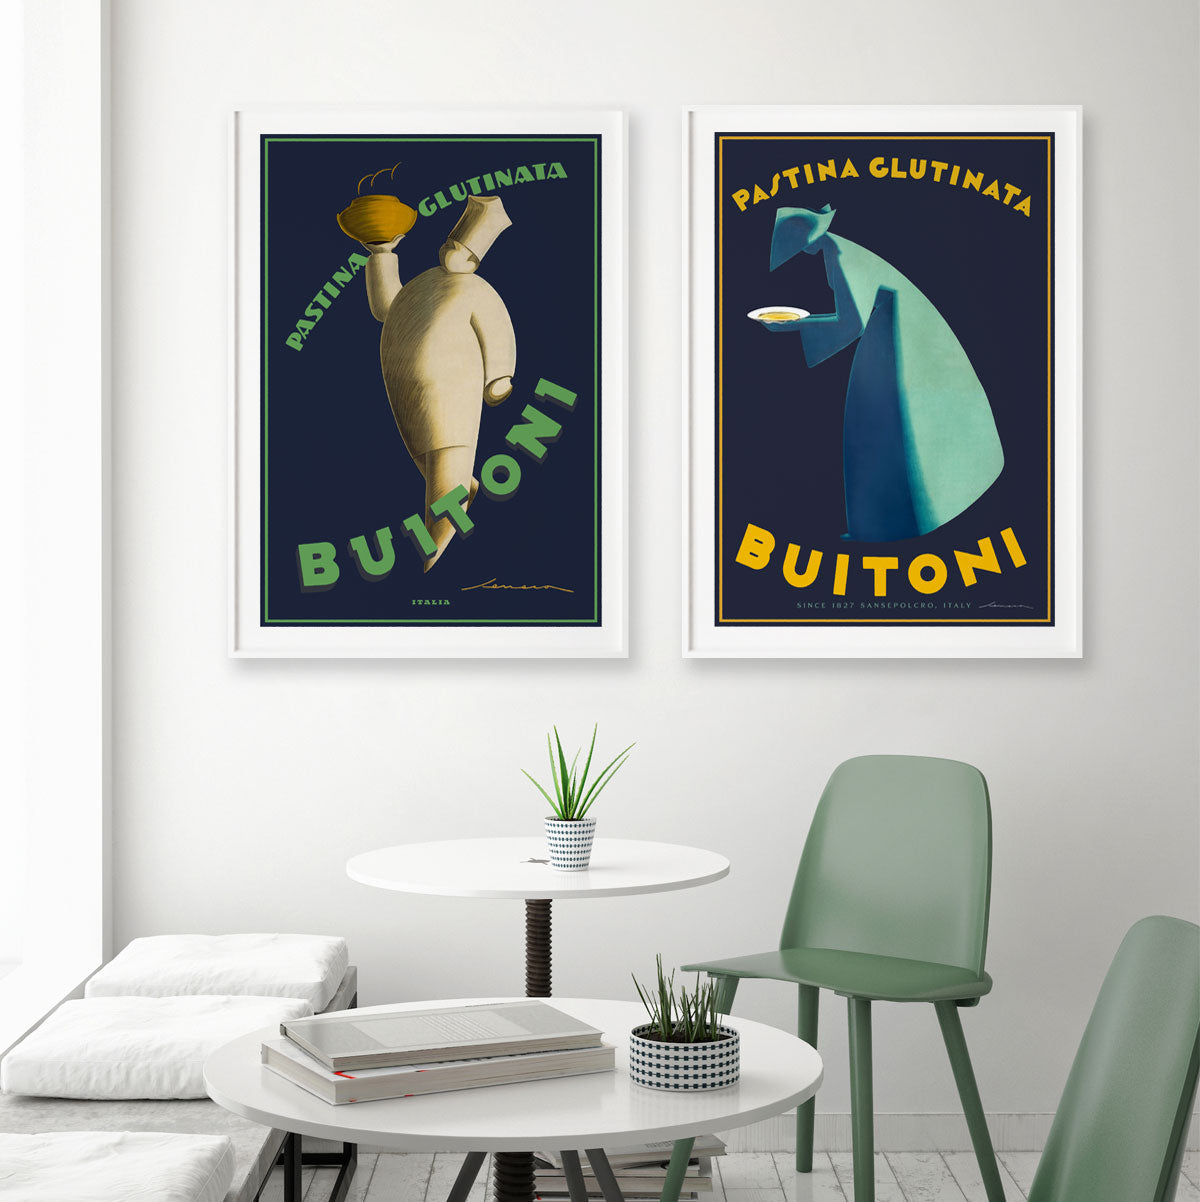 Buitoni Italy retro vintage advertising poster prints from Places We Luv